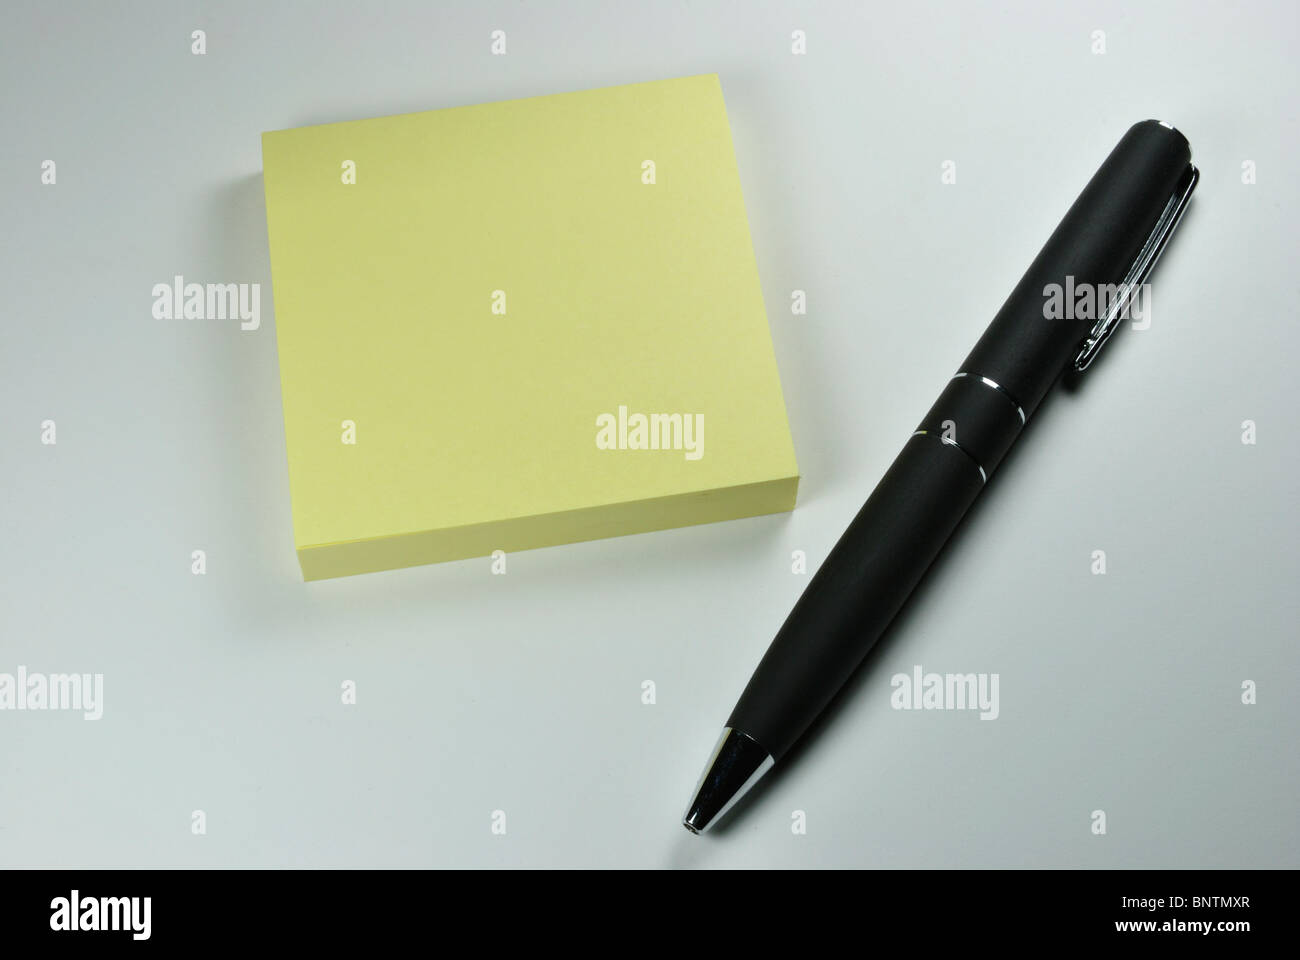 Black pen laying next to book of sticky notes Stock Photo